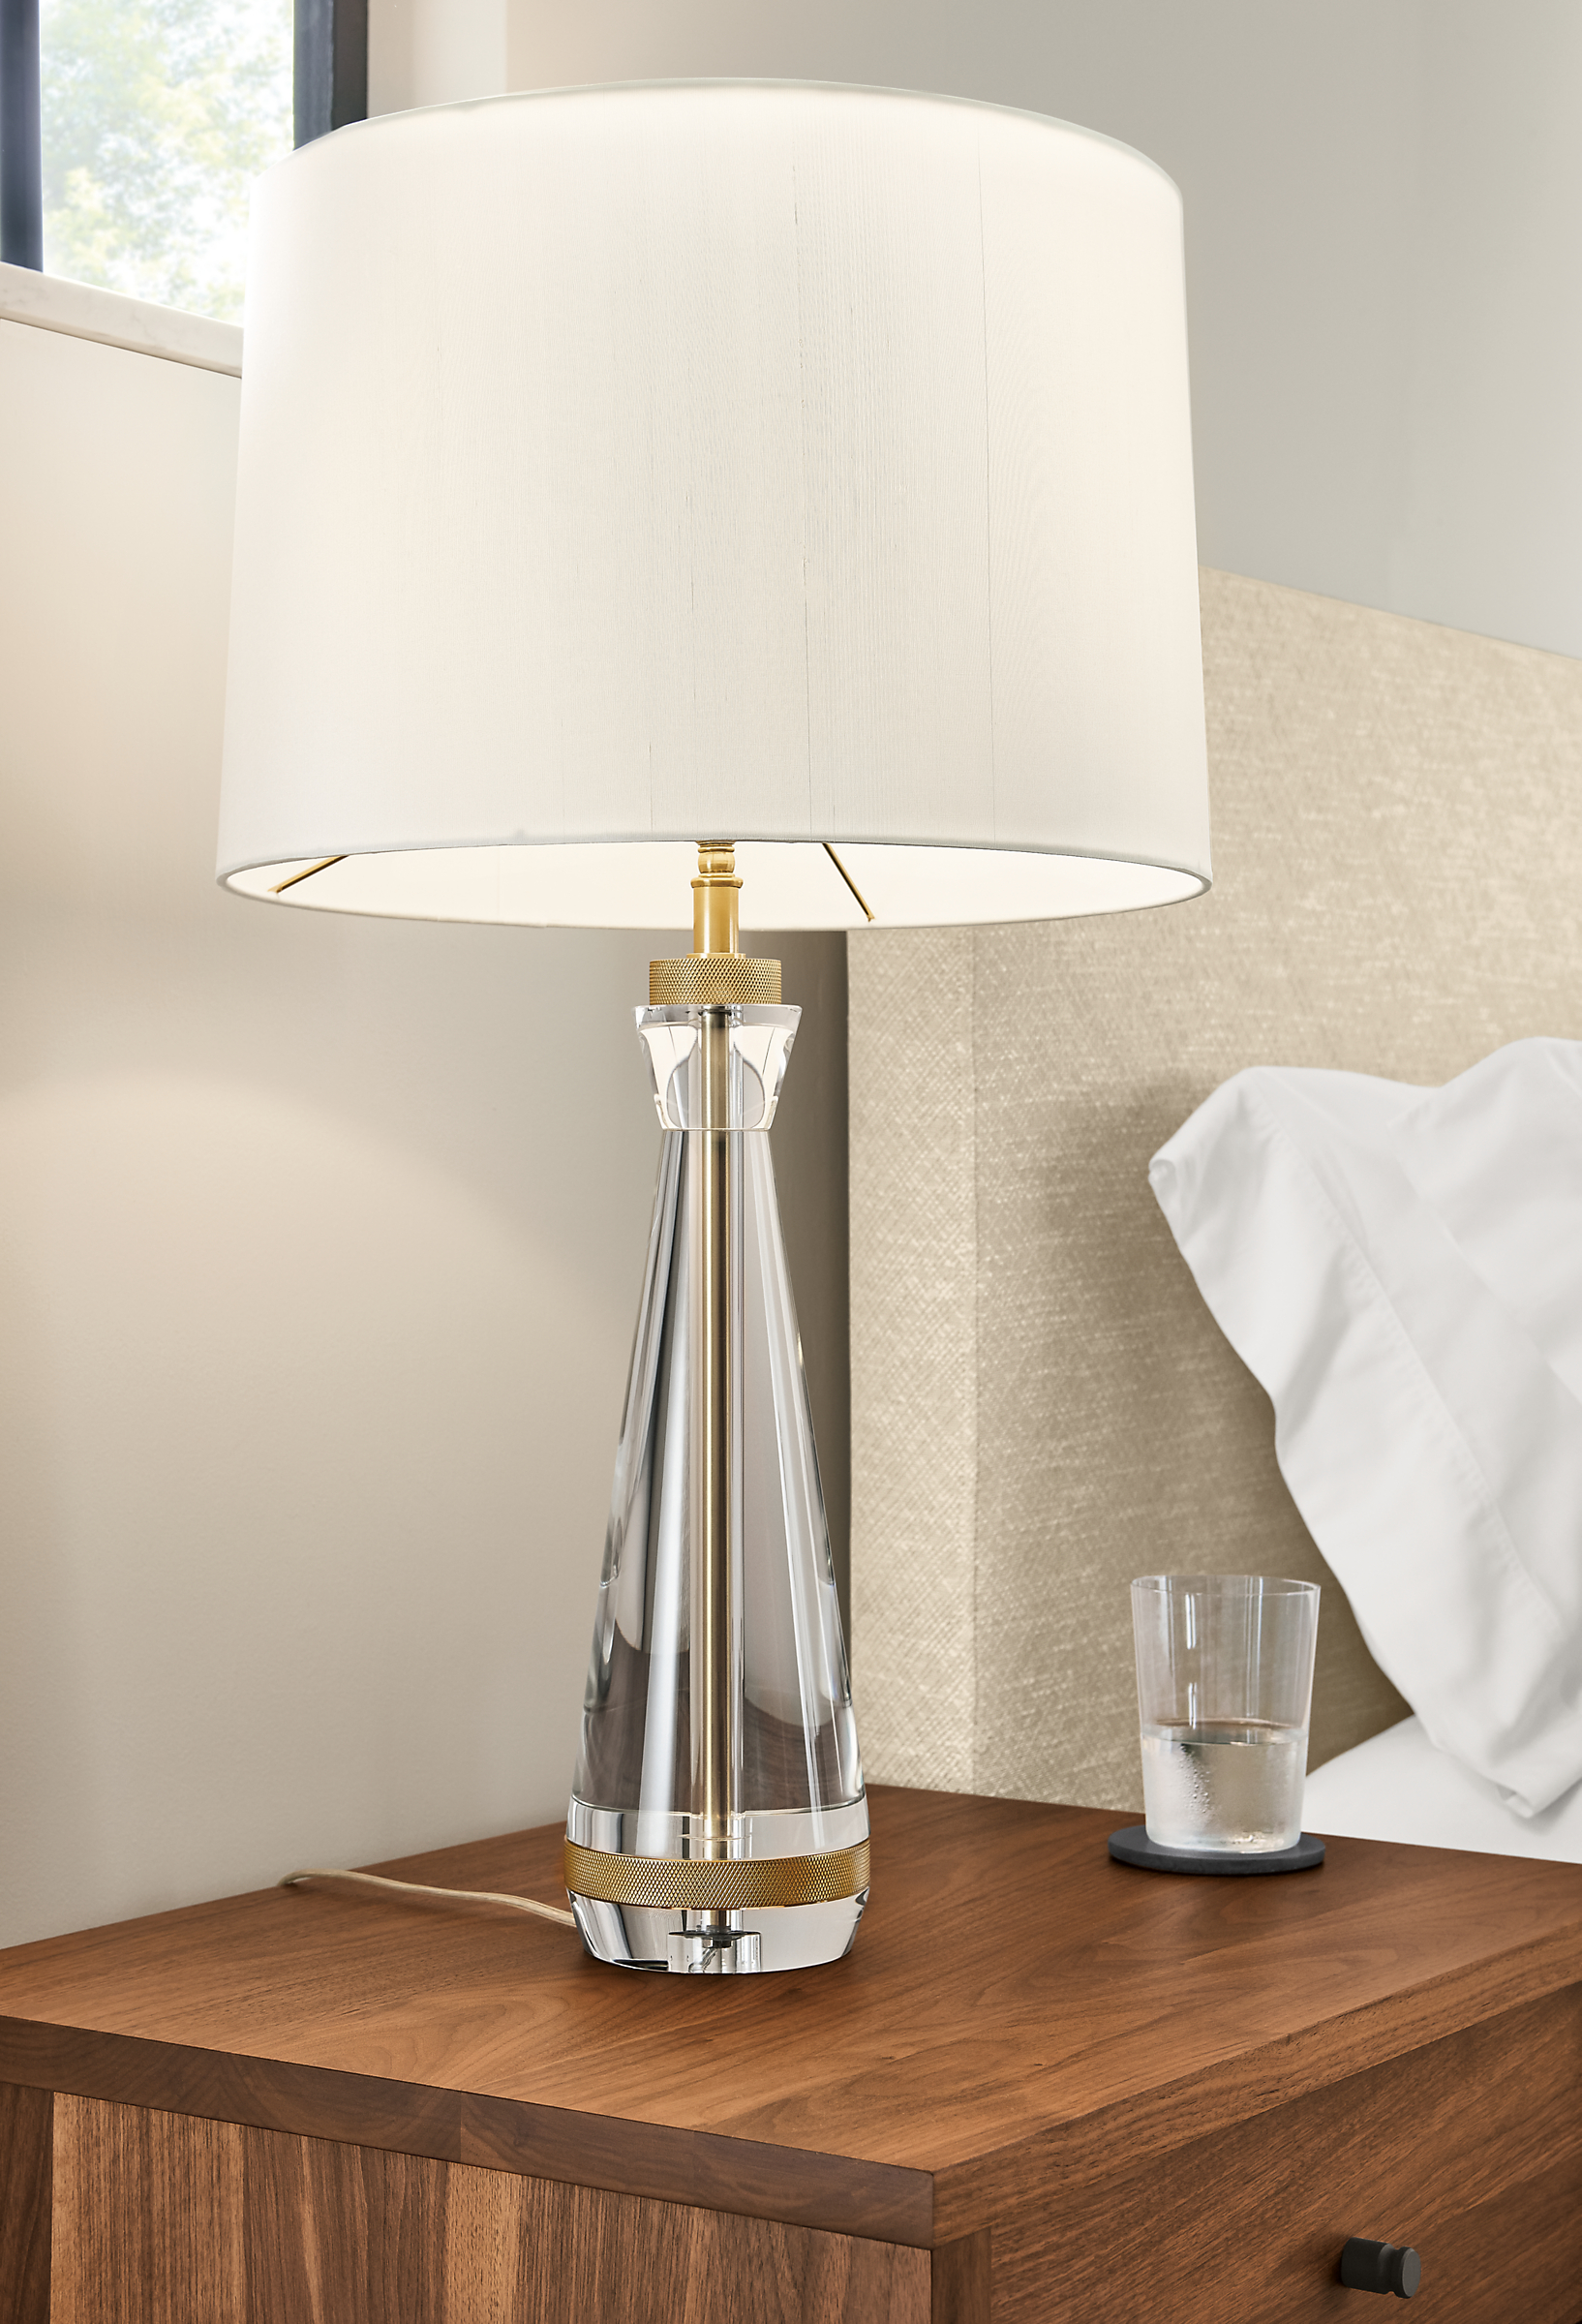 Detail of Gatsby table lamp.